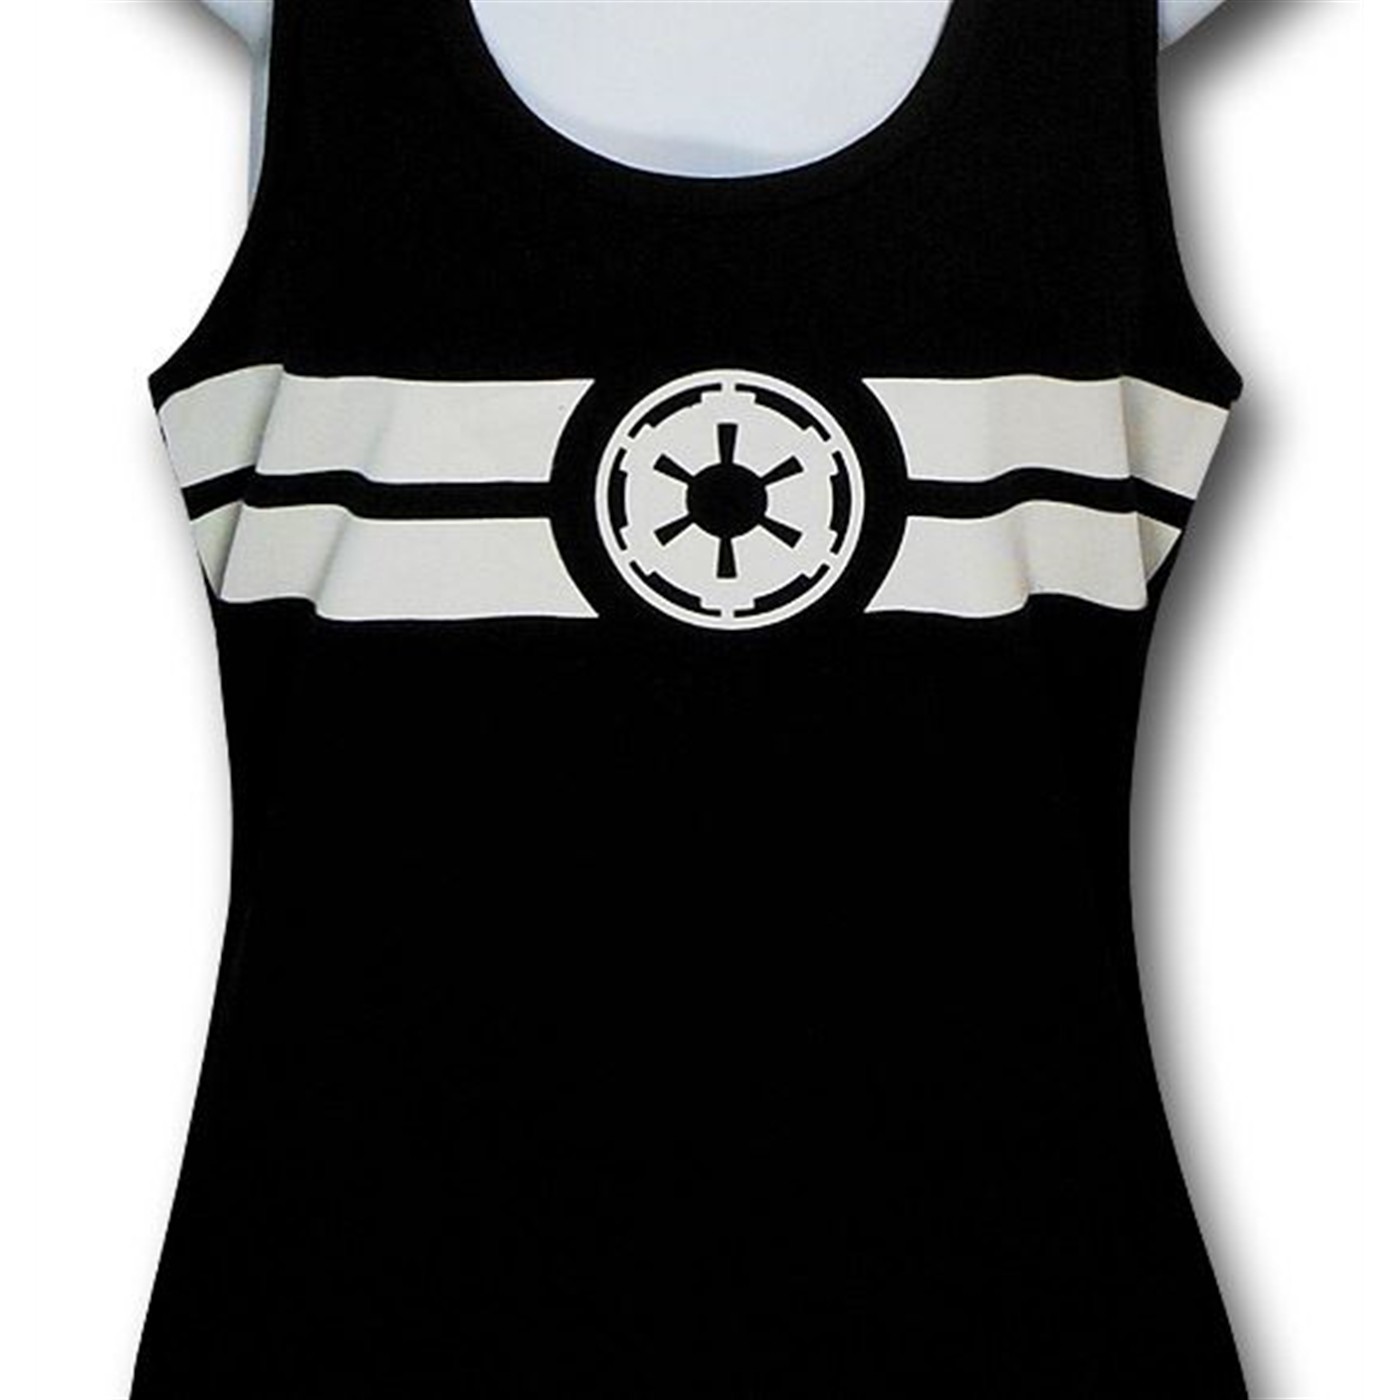 The 100% cotton Star Wars Imperial Symbol Women's Tank Top